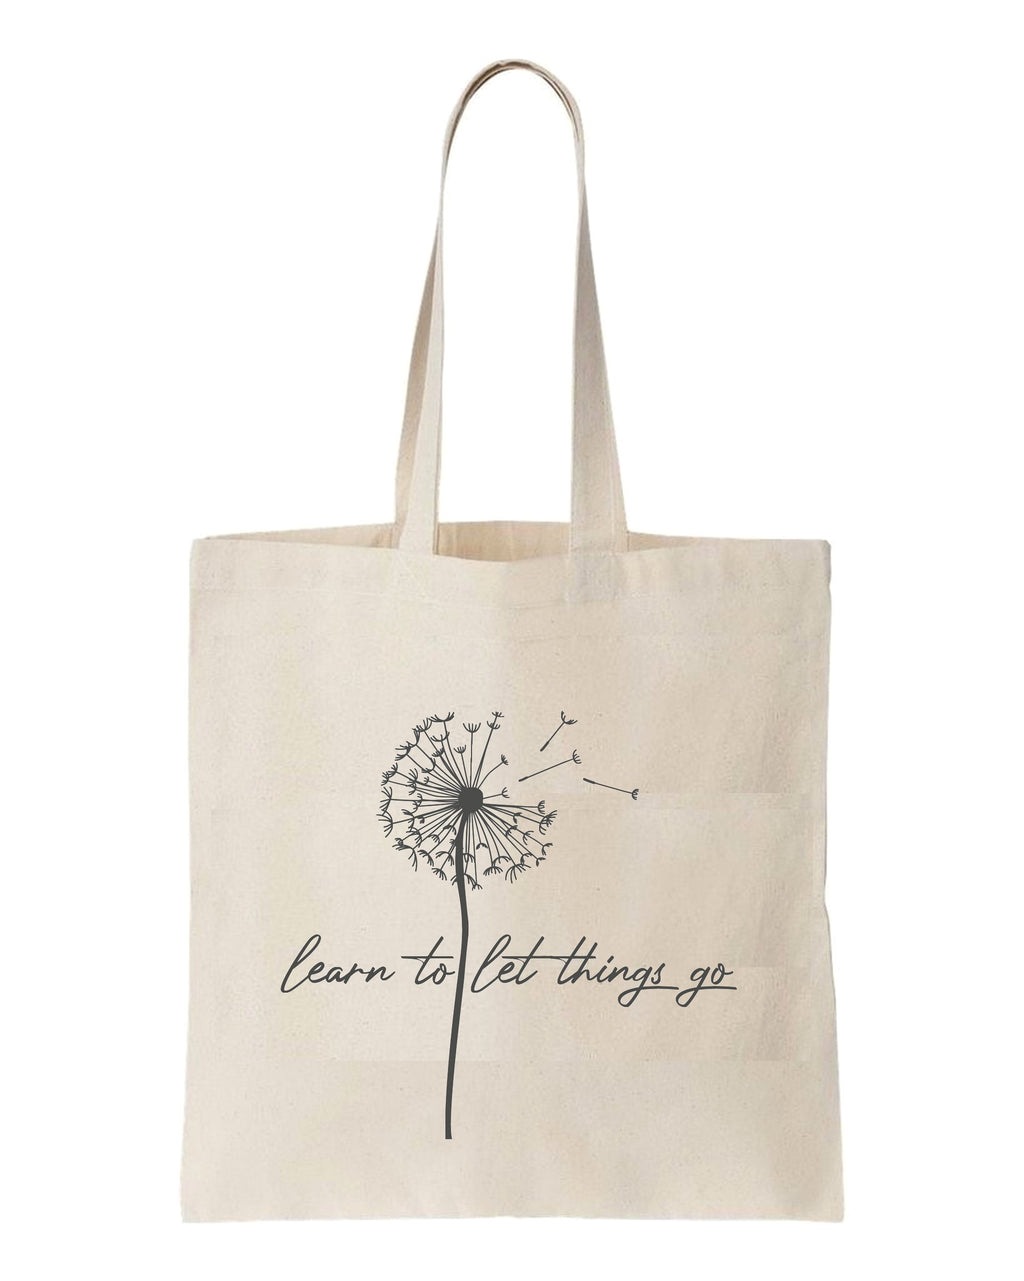 TOTE BAG Learn to let things go